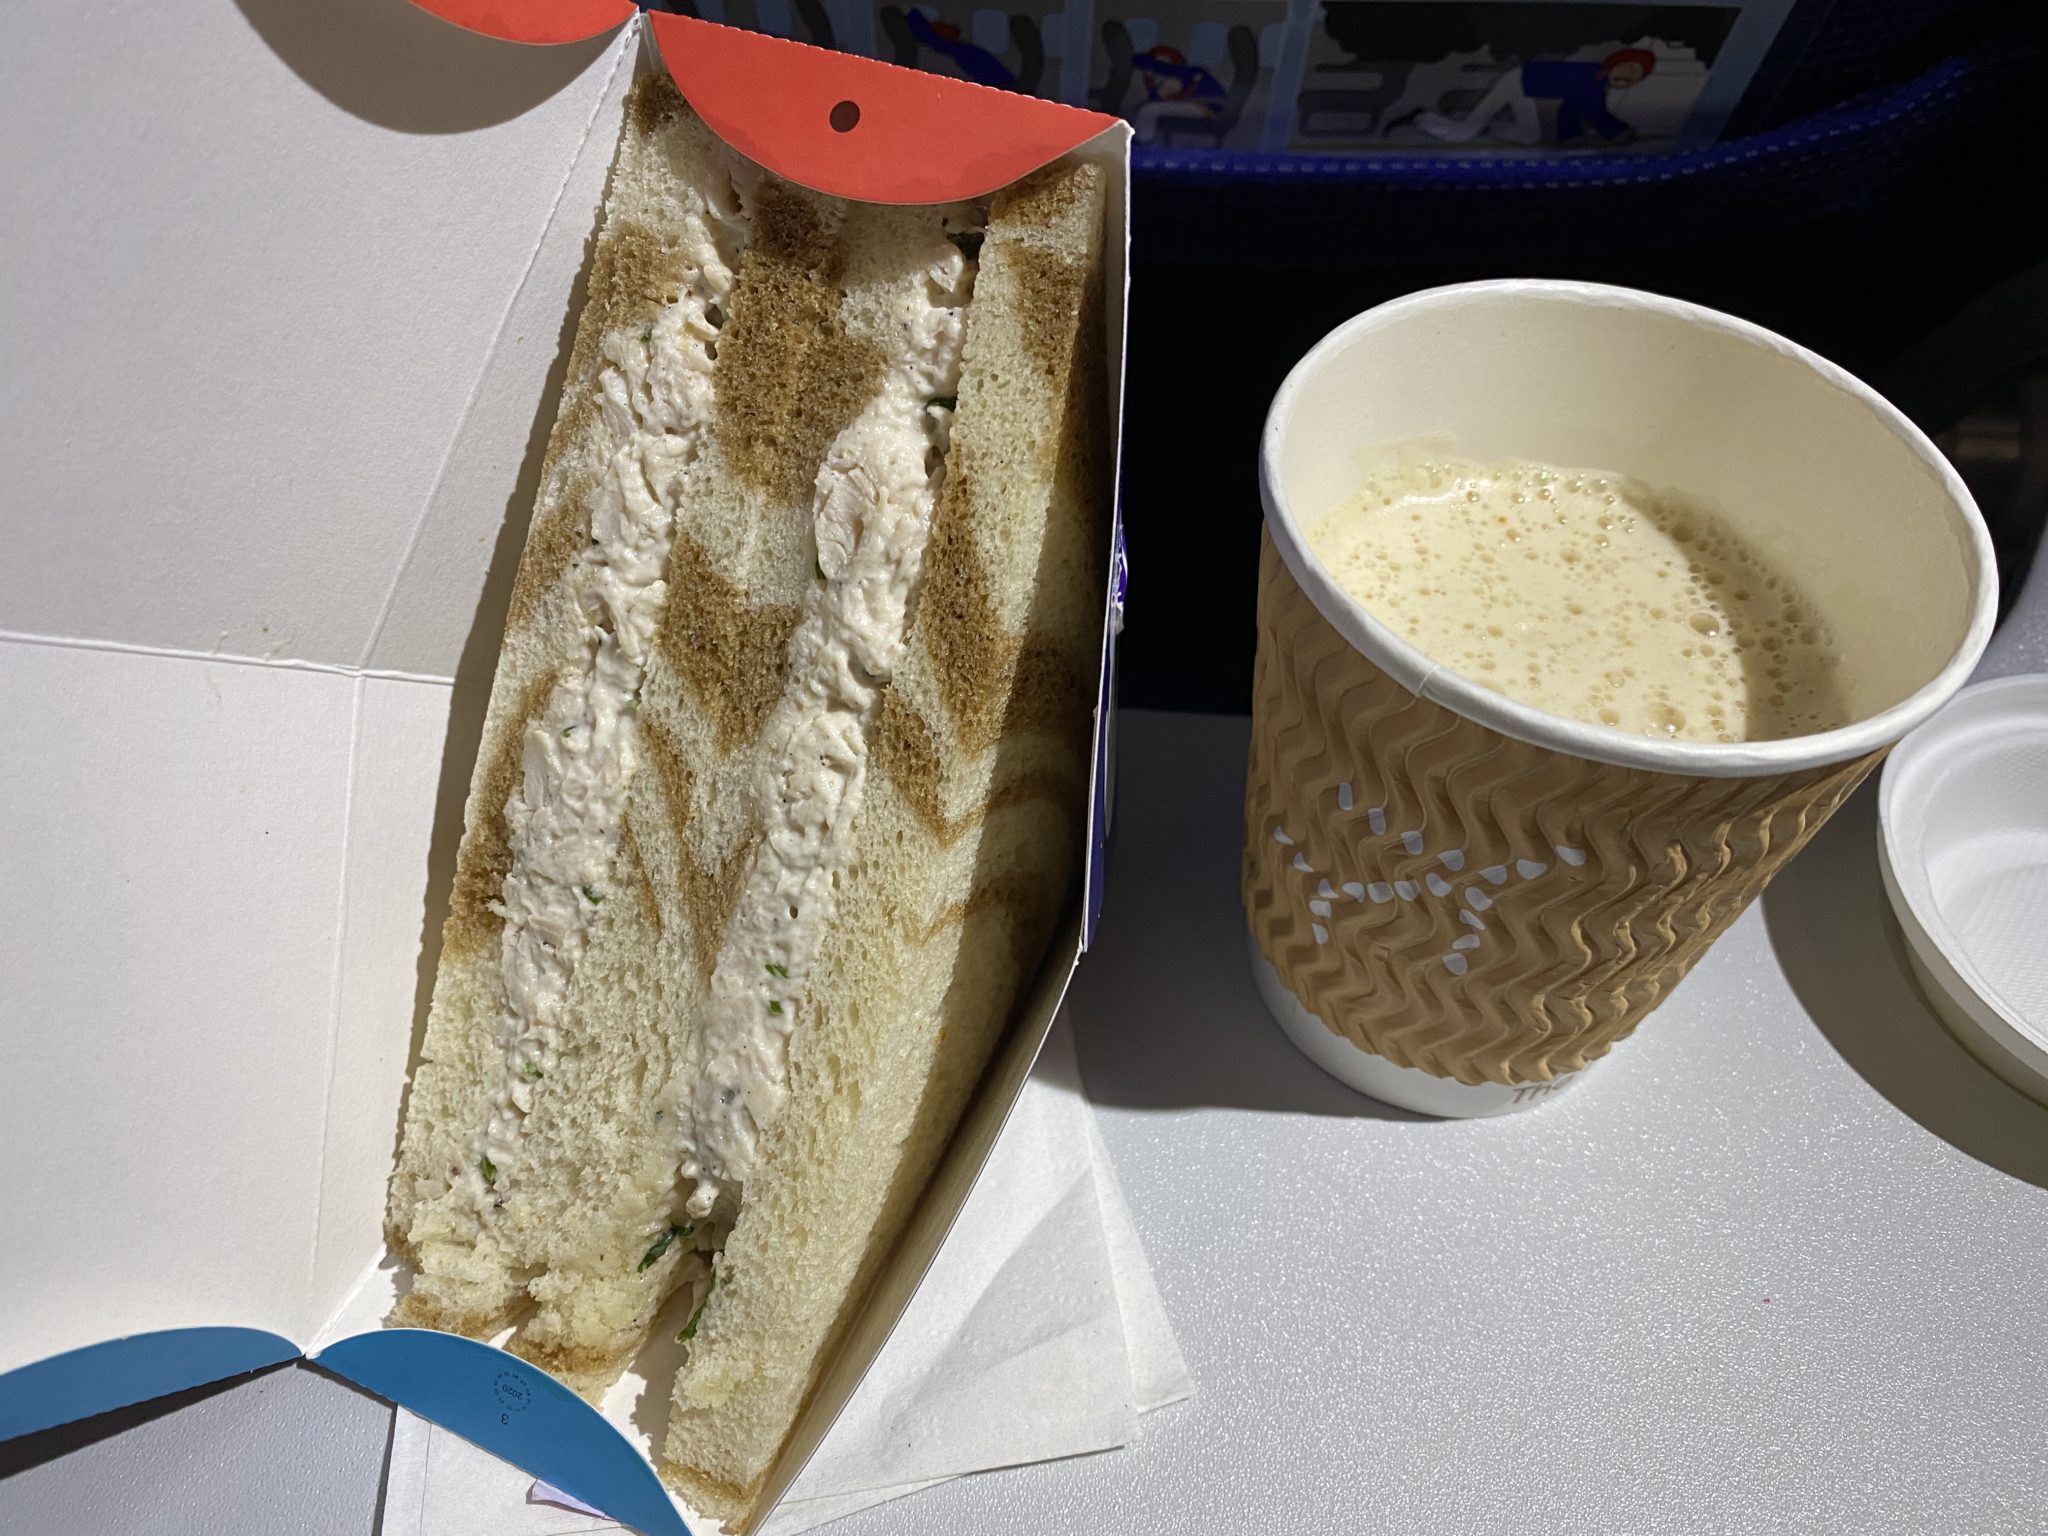 a sandwich in a box next to a cup of coffee